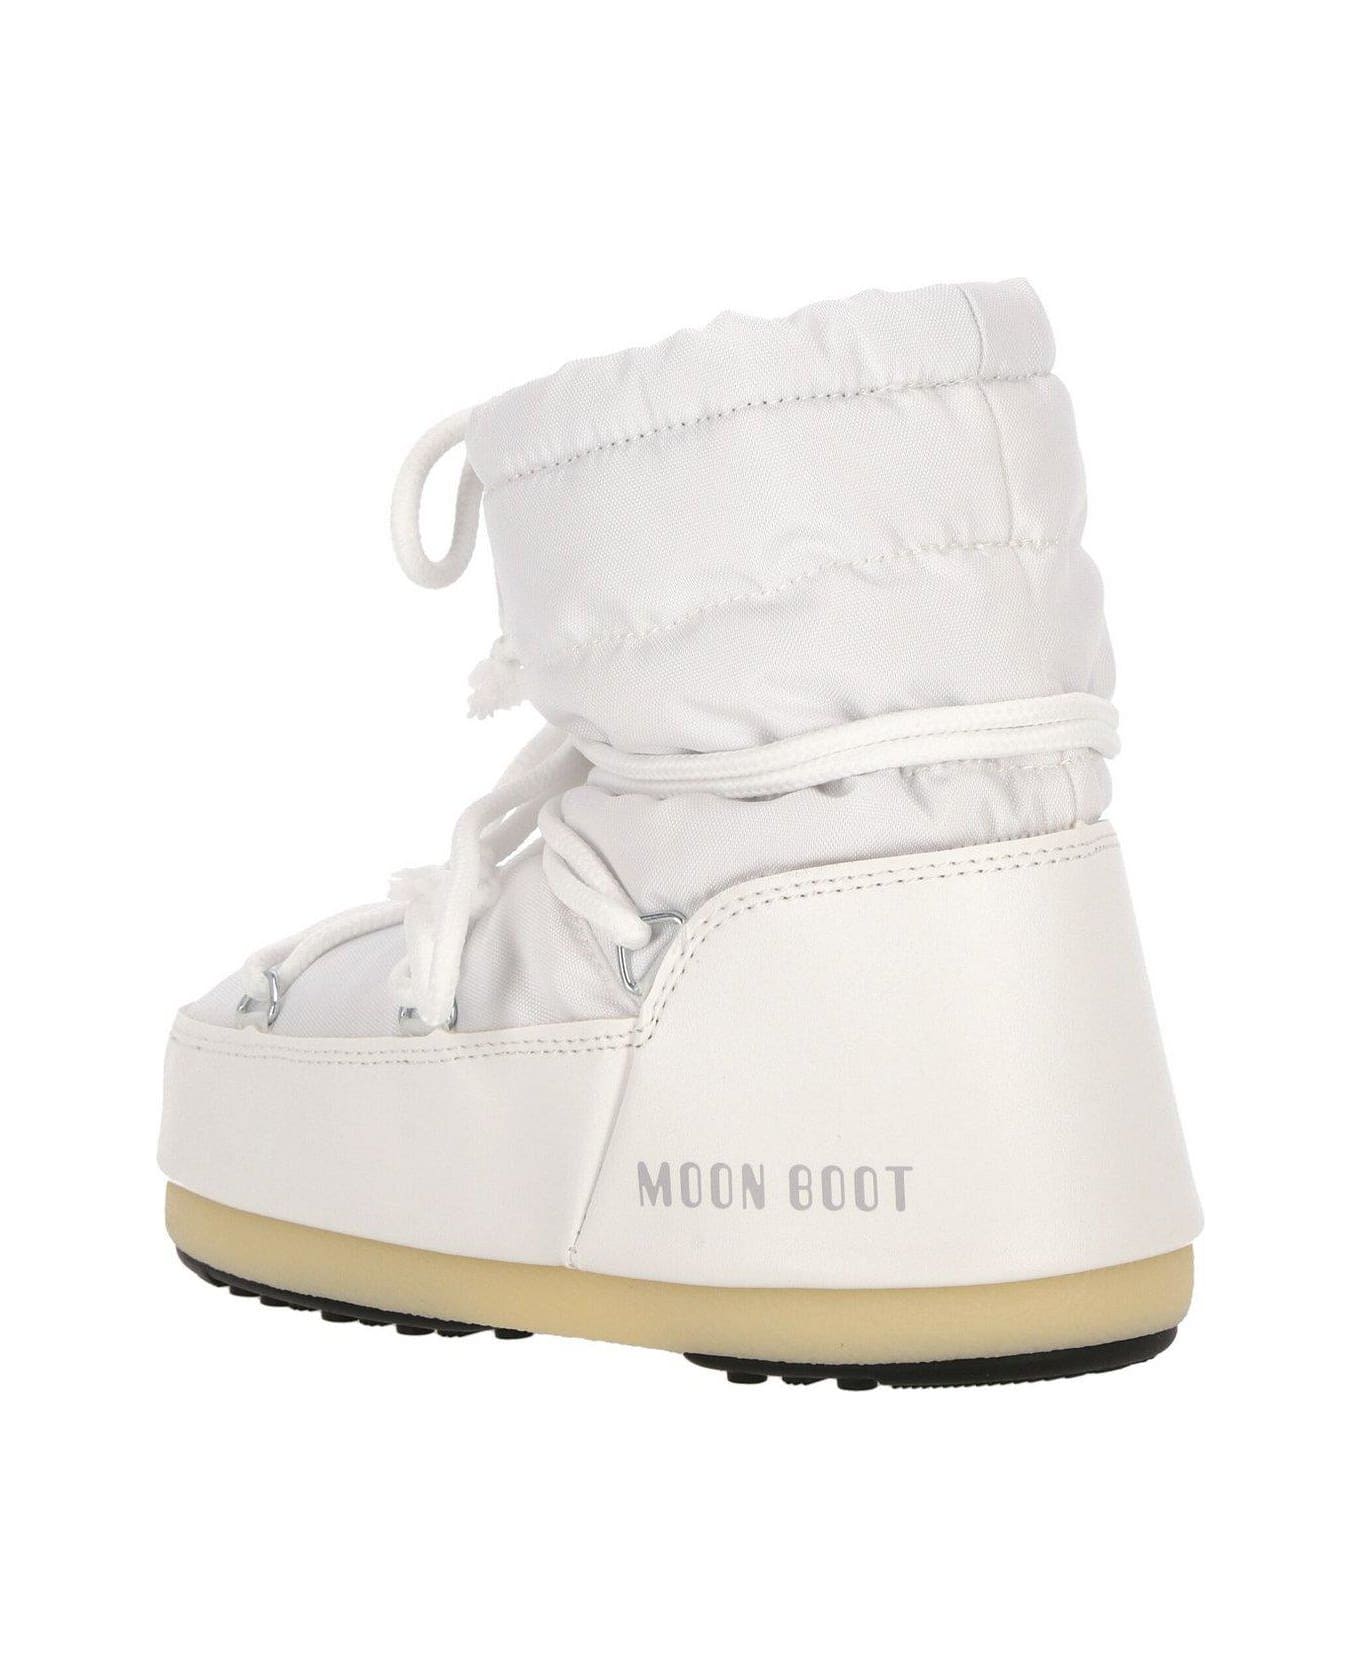 Moon Boot Round Toe Lace-up Ankle Boots - WHITE